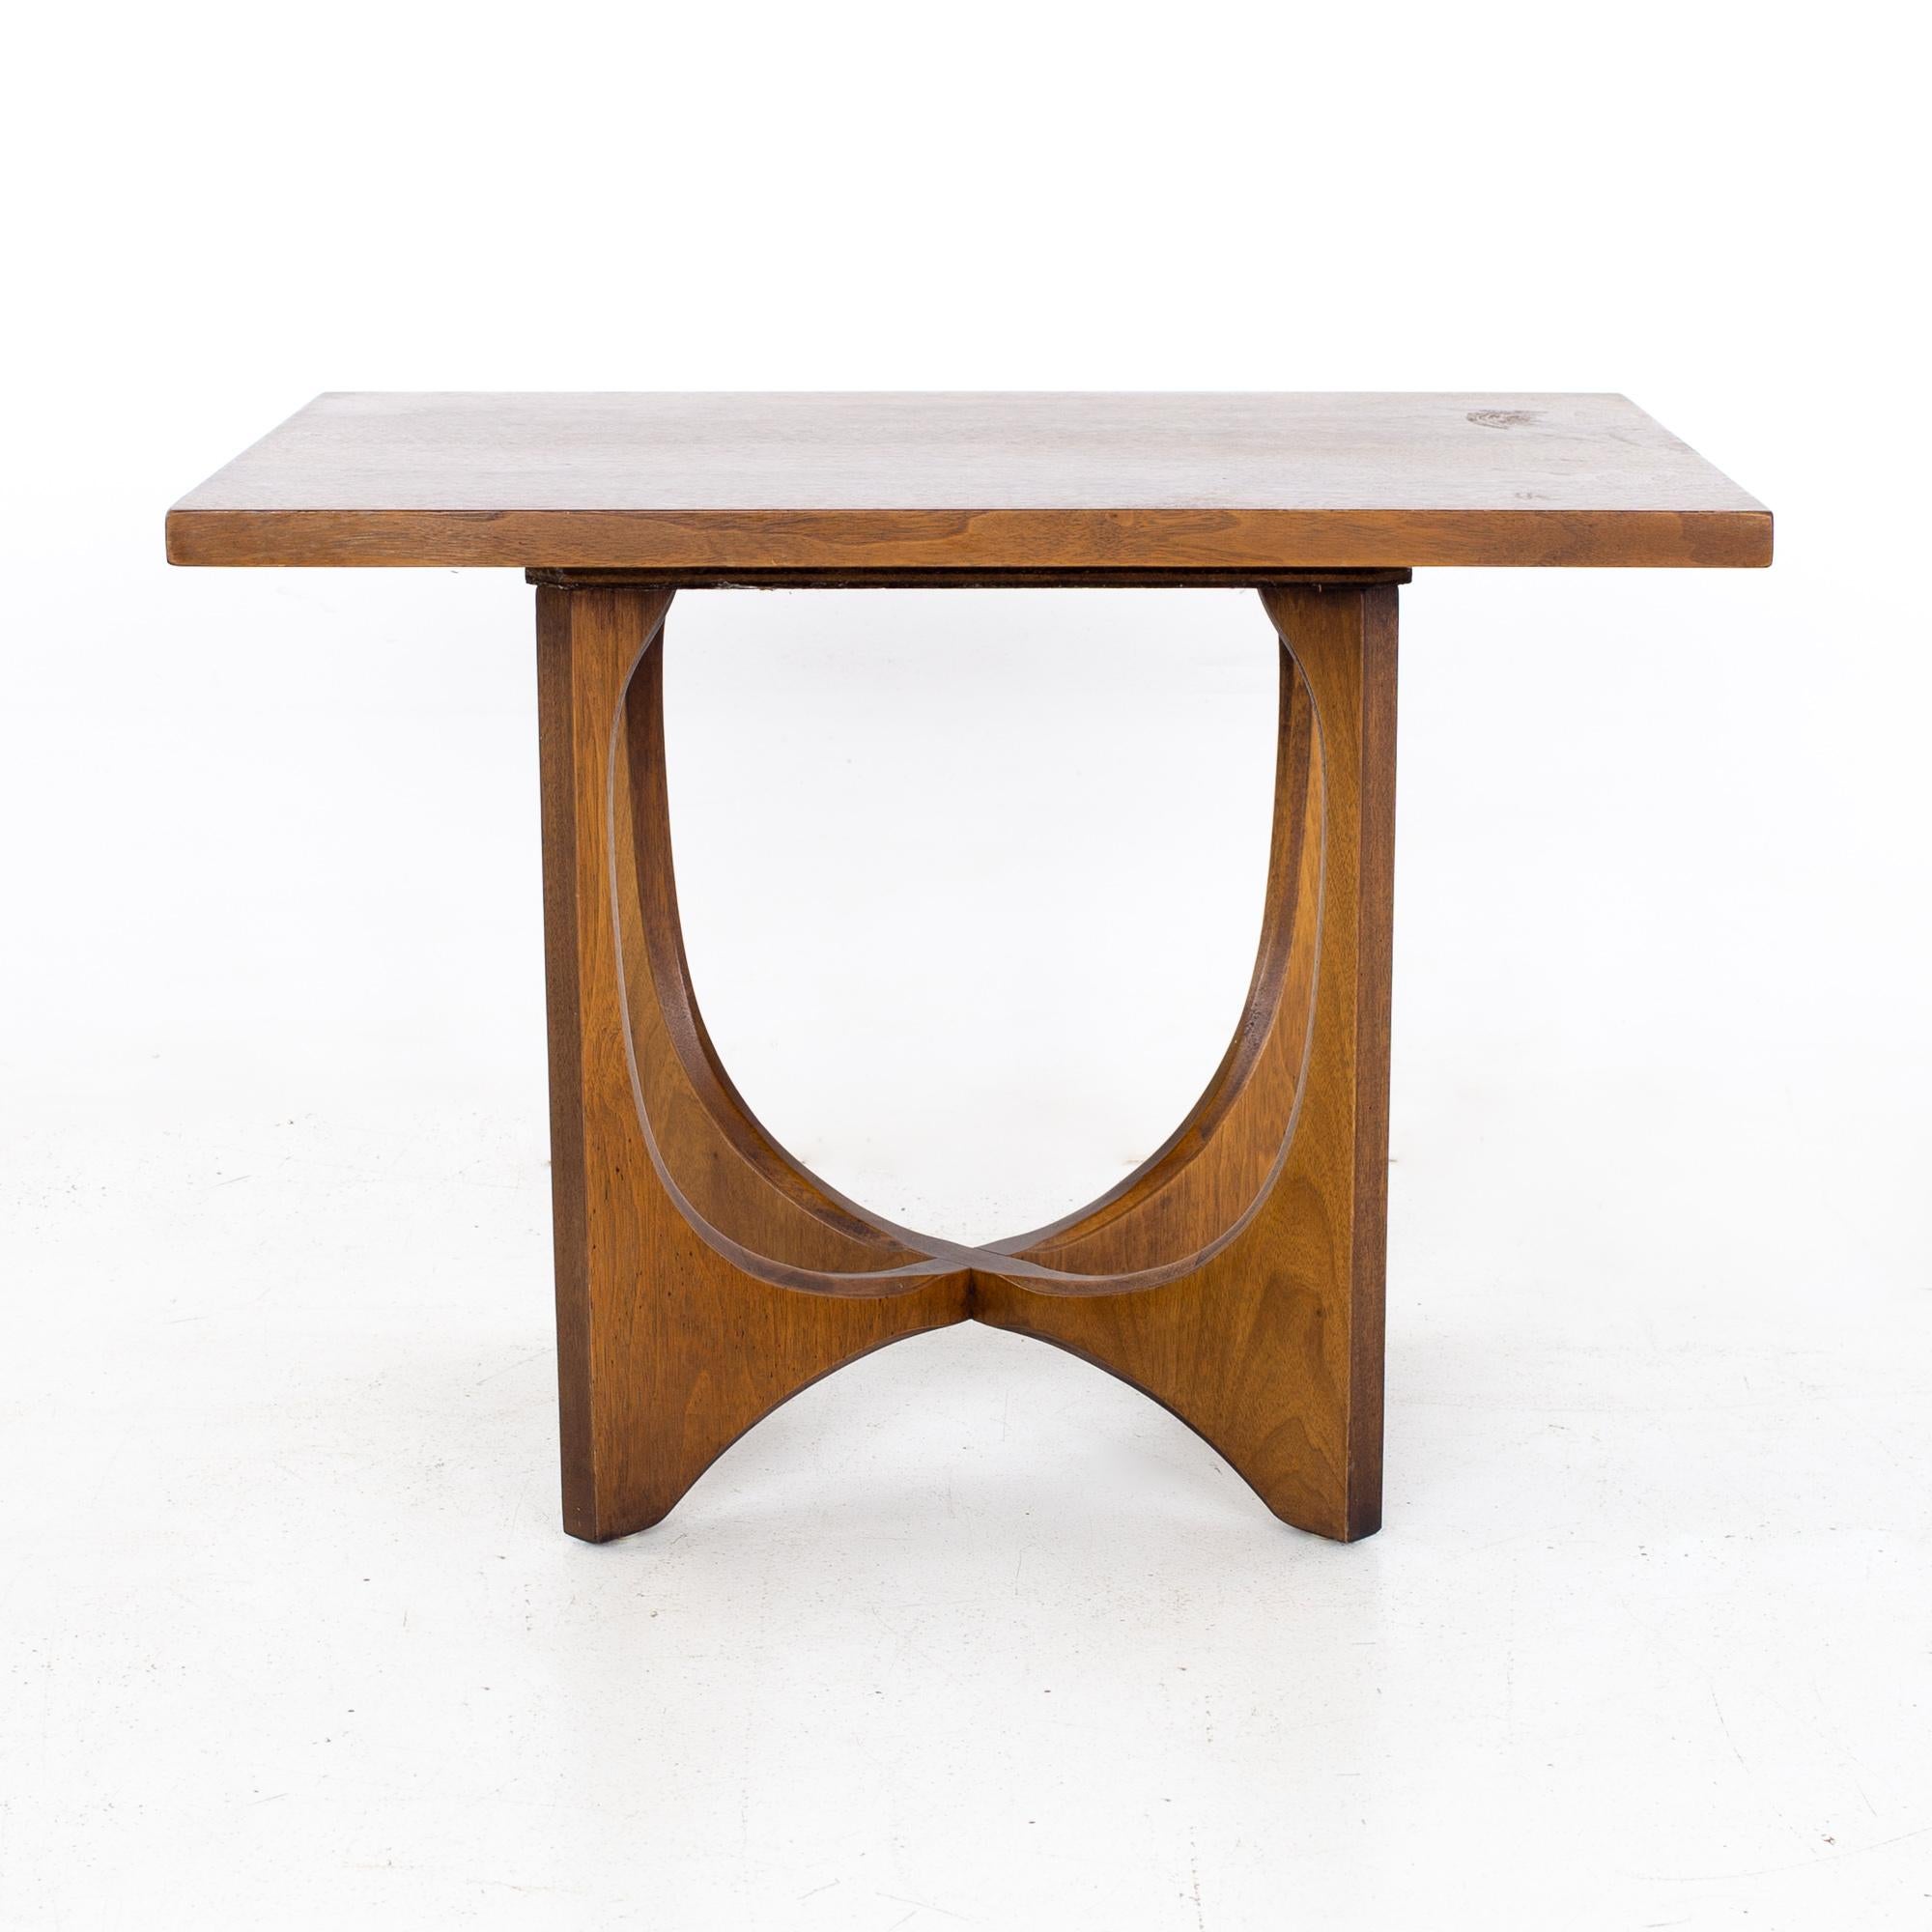 Broyhill Brasilia Brutalist mid century walnut side end table
Table measures: 28 wide x 20 deep x 20 inches high

All pieces of furniture can be had in what we call restored vintage condition. That means the piece is restored upon purchase so